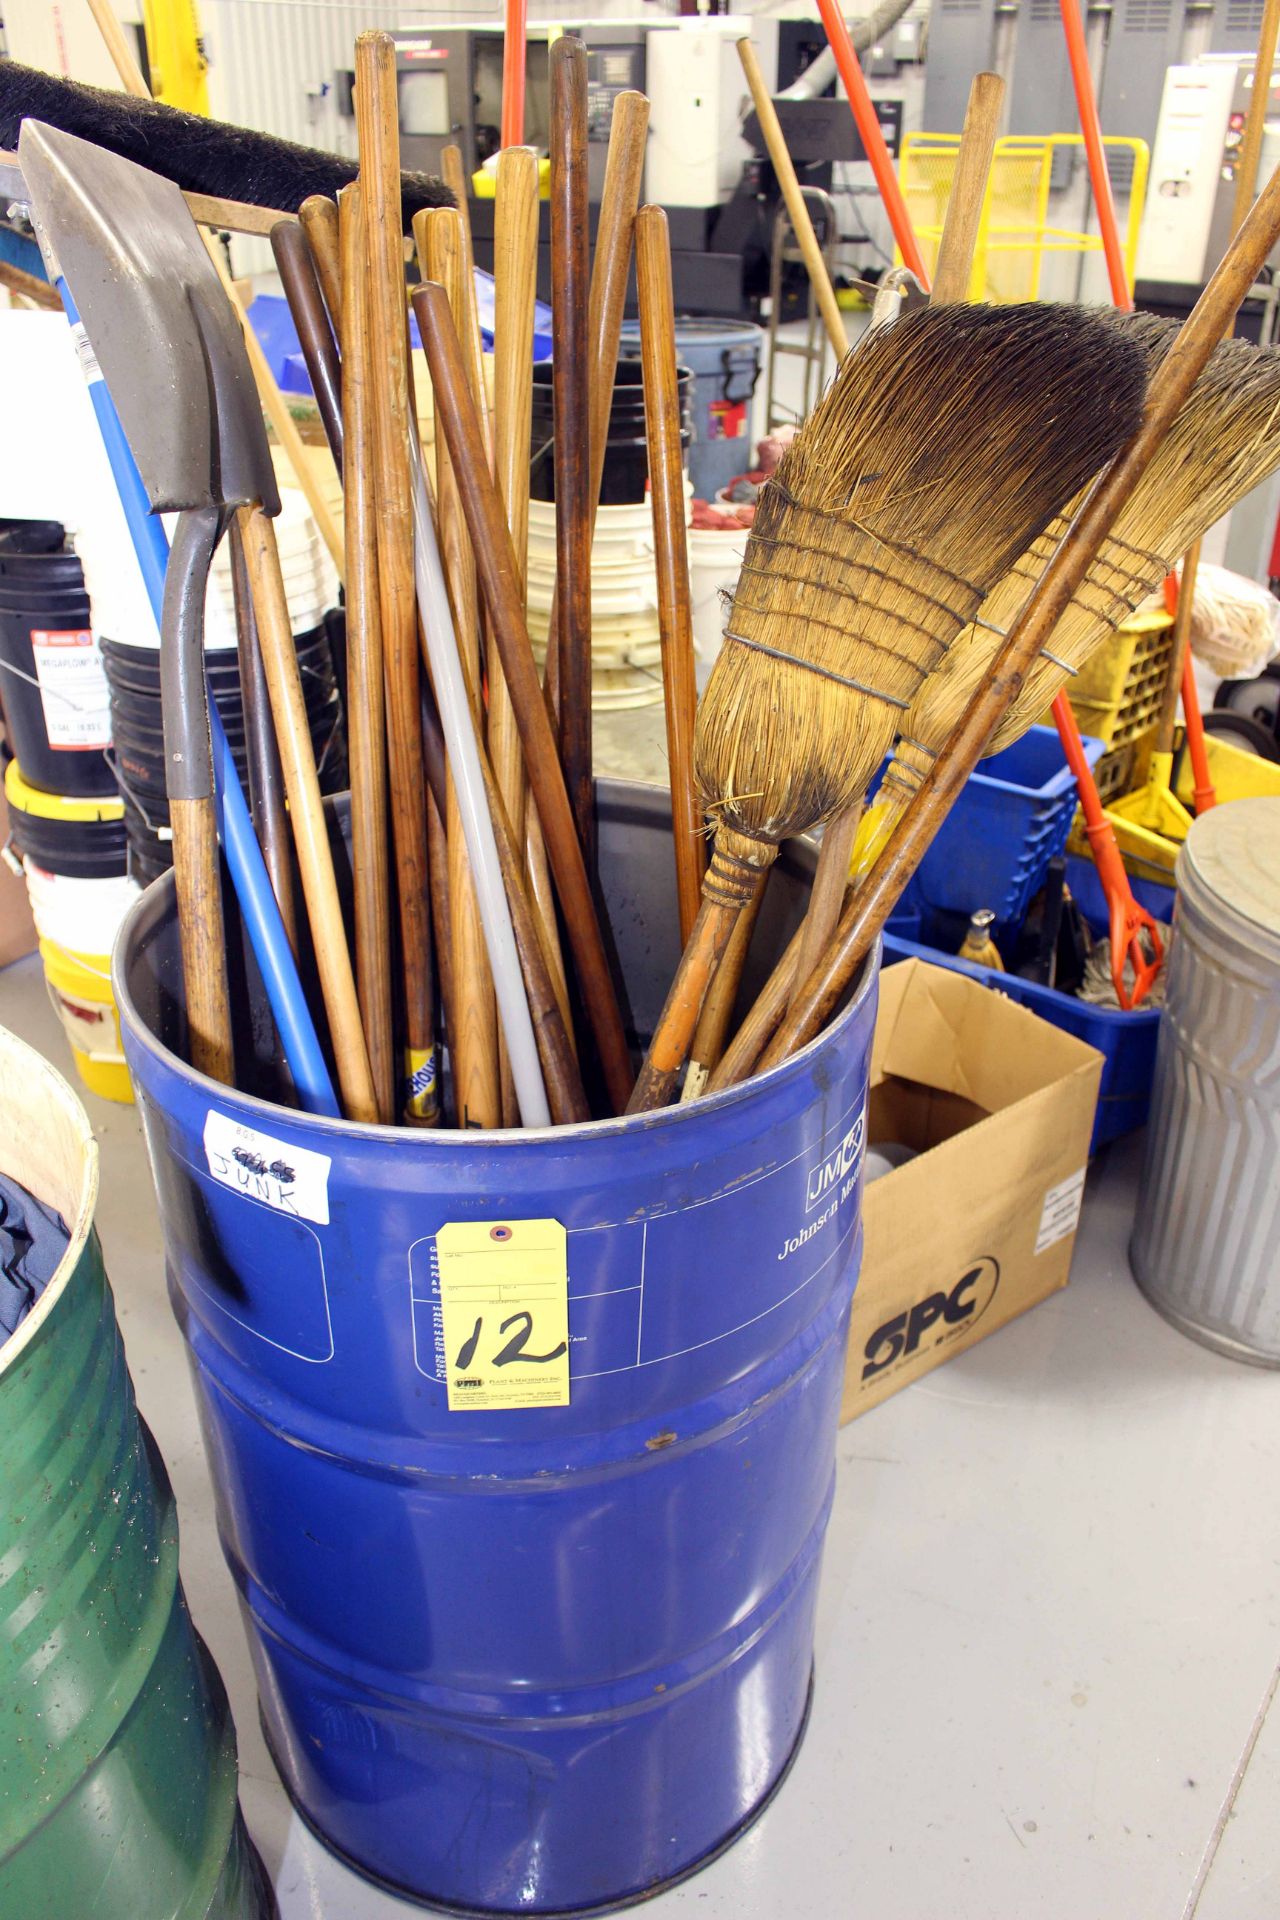 LOT OF CLEANING SUPPLIES: mops, mop buckets, trash cans, buckets